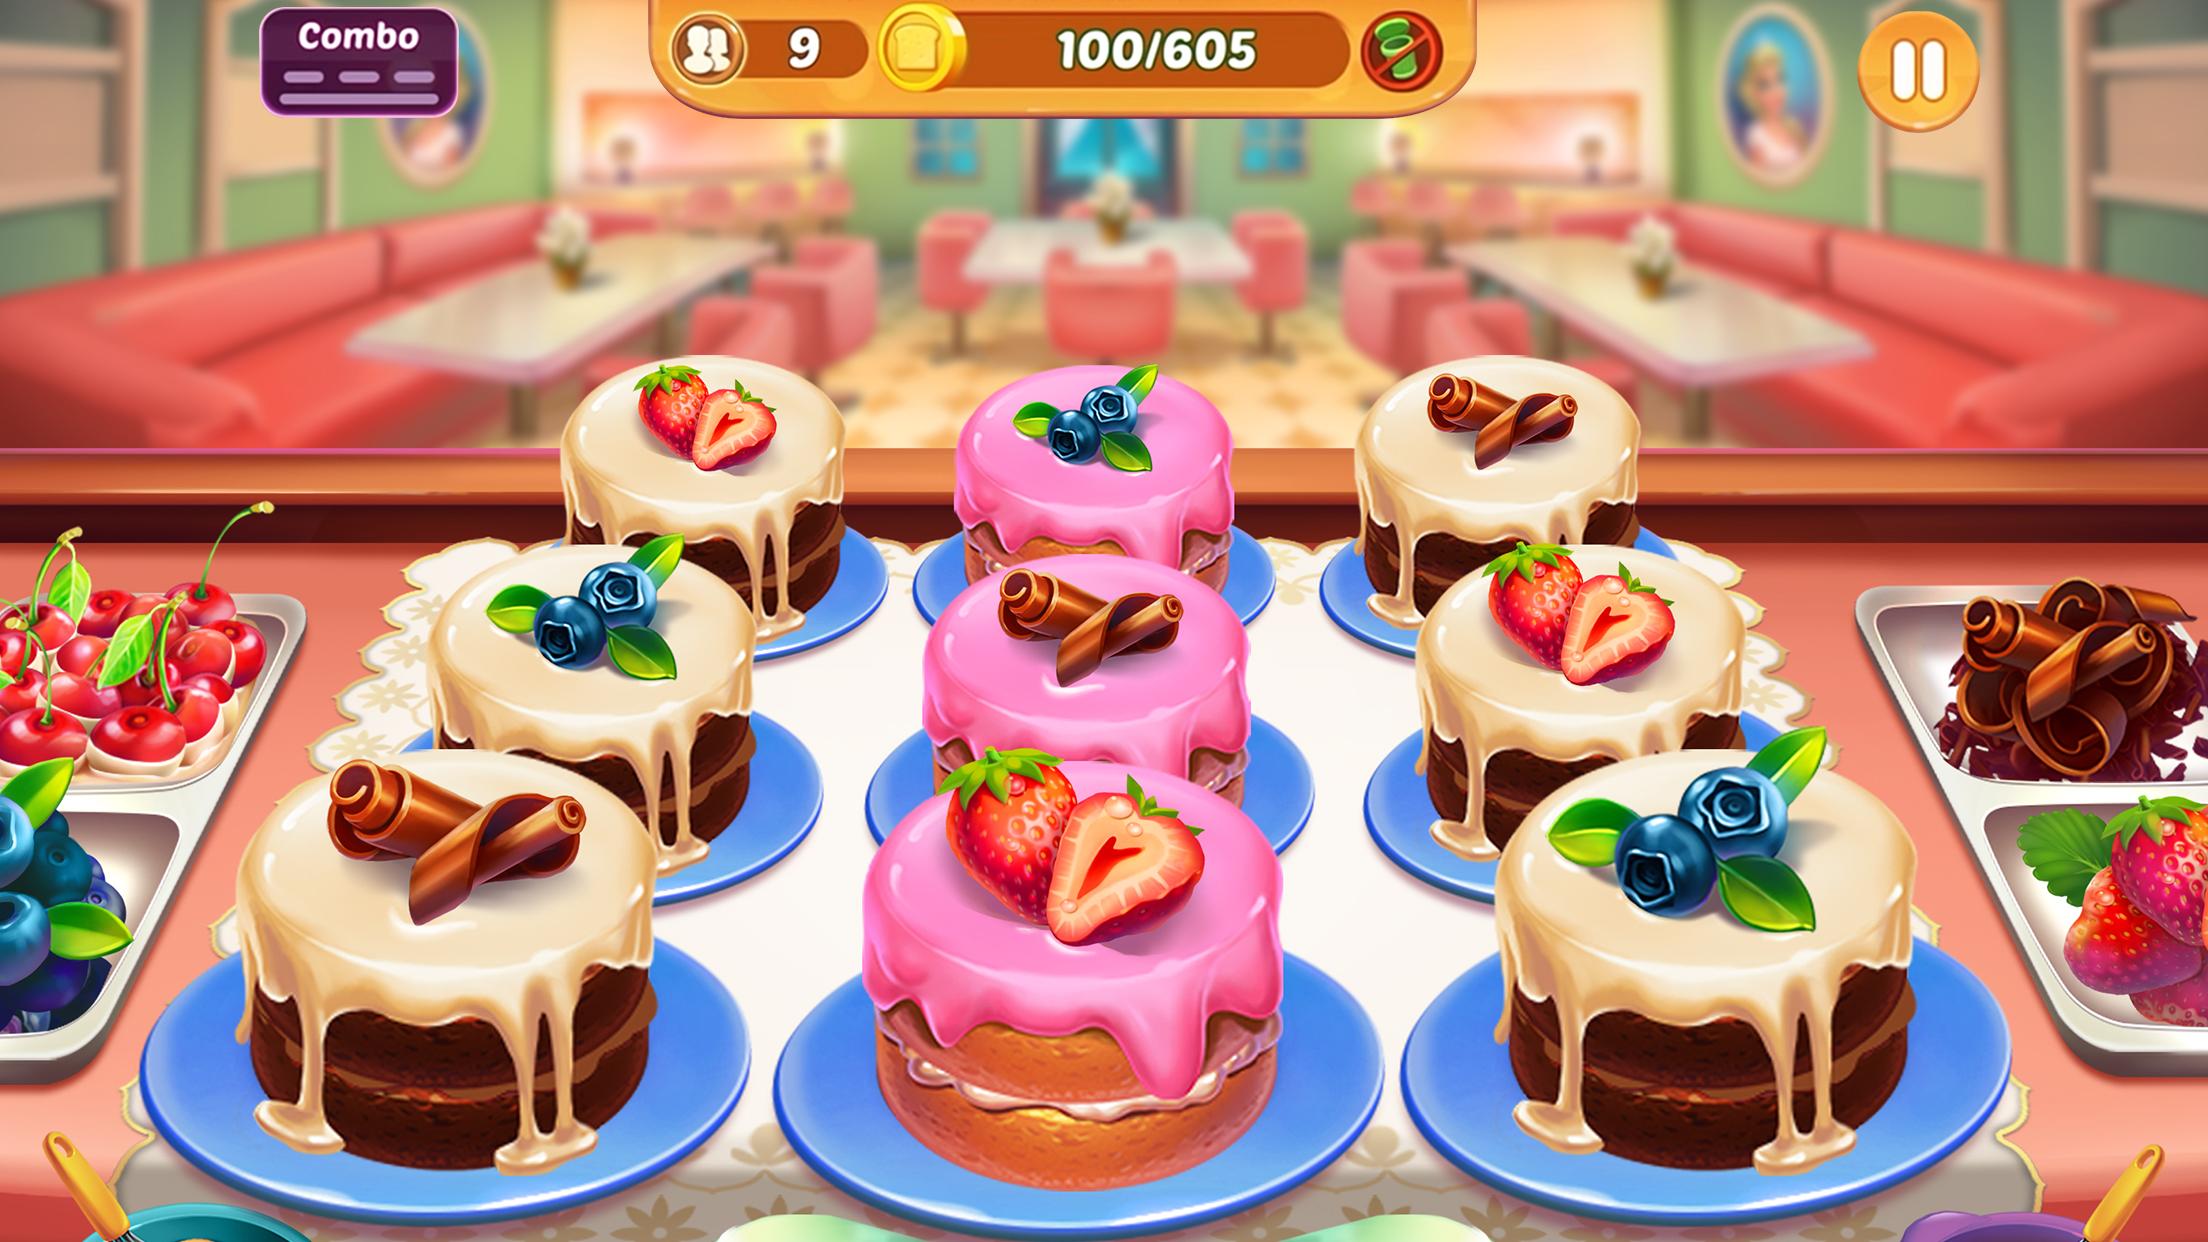 Cooking Crush Cooking Games Madness - Frenzy City 1.2.4 Screenshot 5